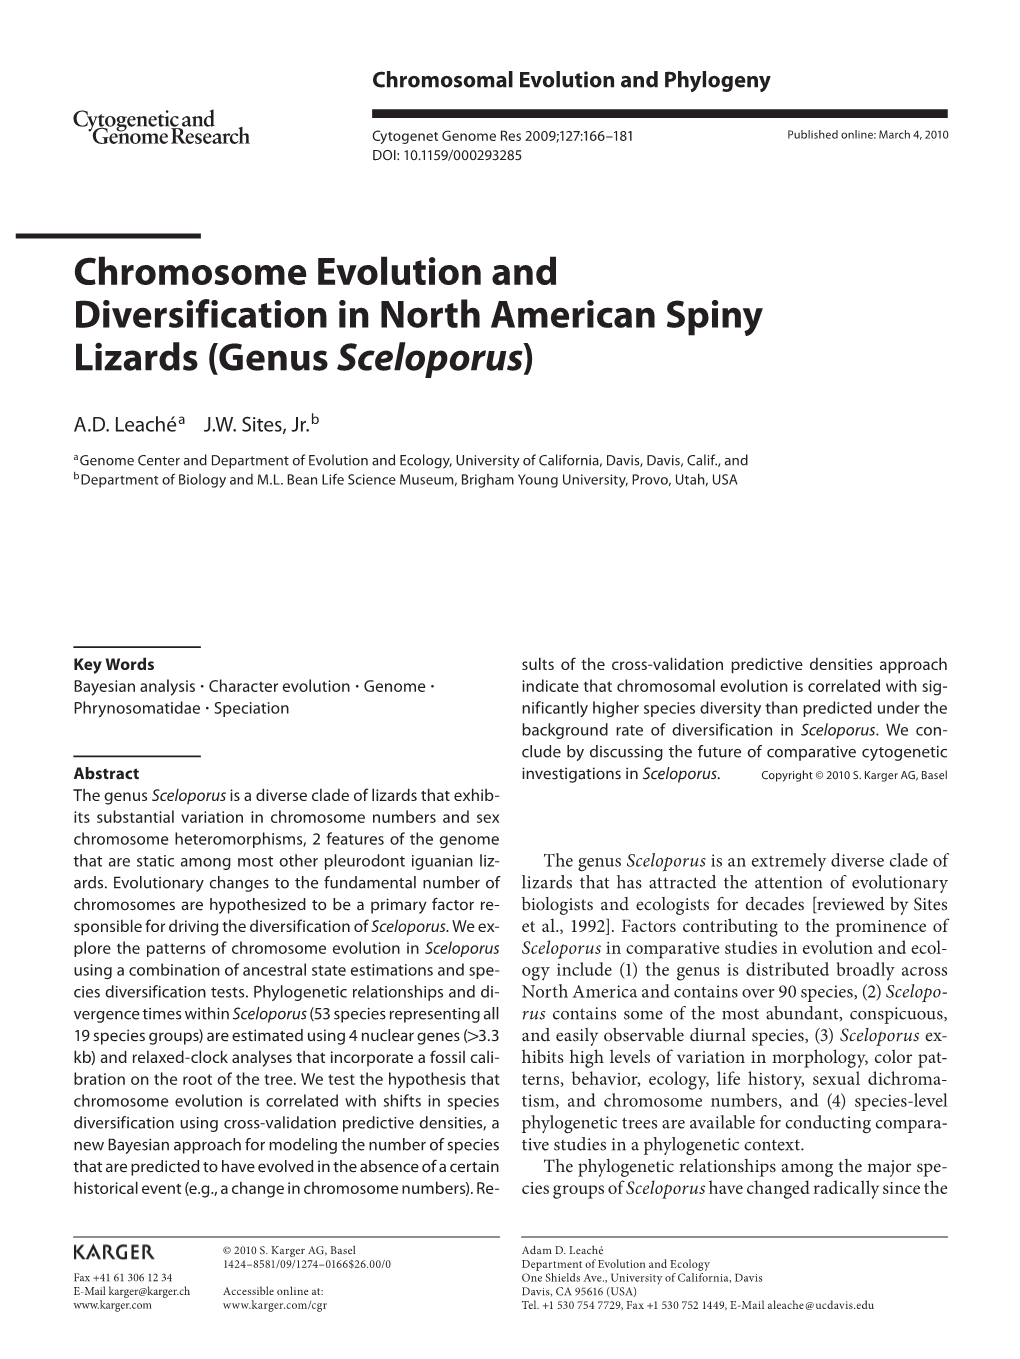 Chromosome Evolution and Diversification in North American Spiny Lizards (Genus Sceloporus )